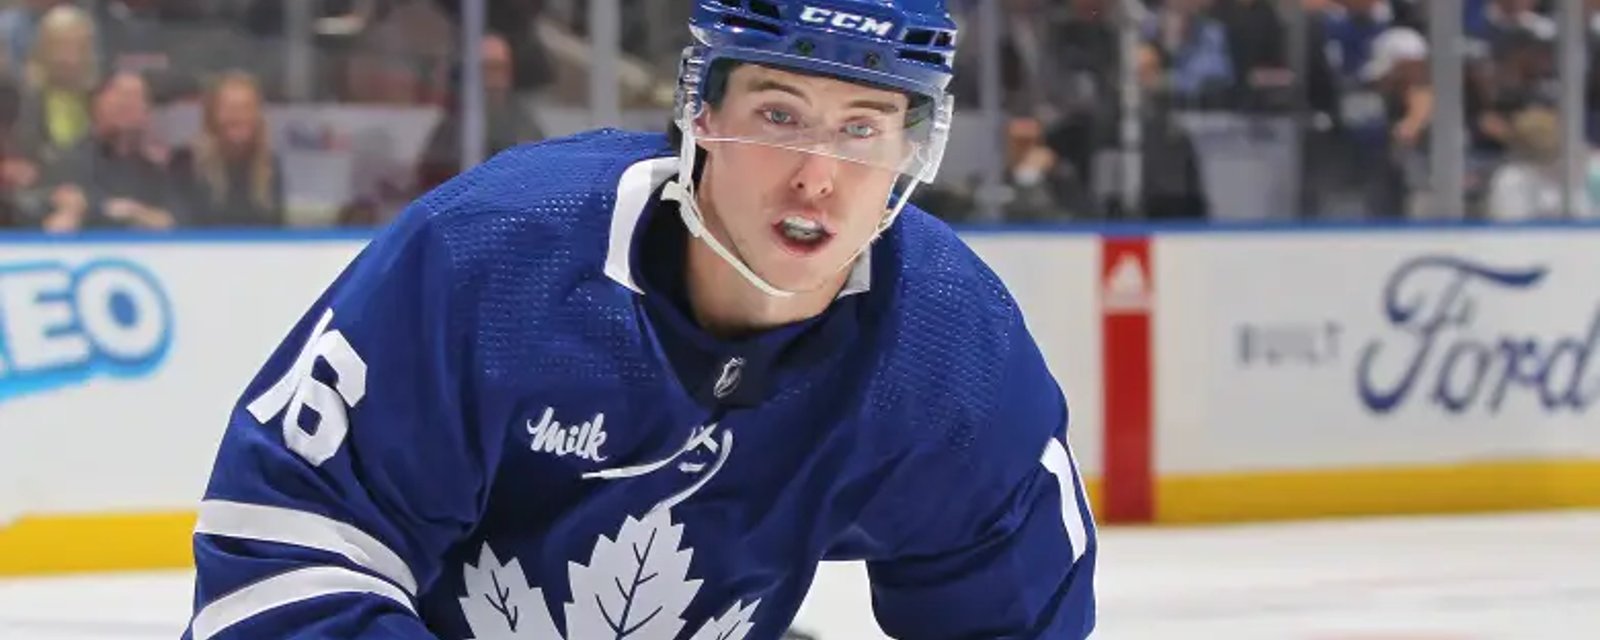 Brad Treliving's true thoughts on Mitch Marner leaked 